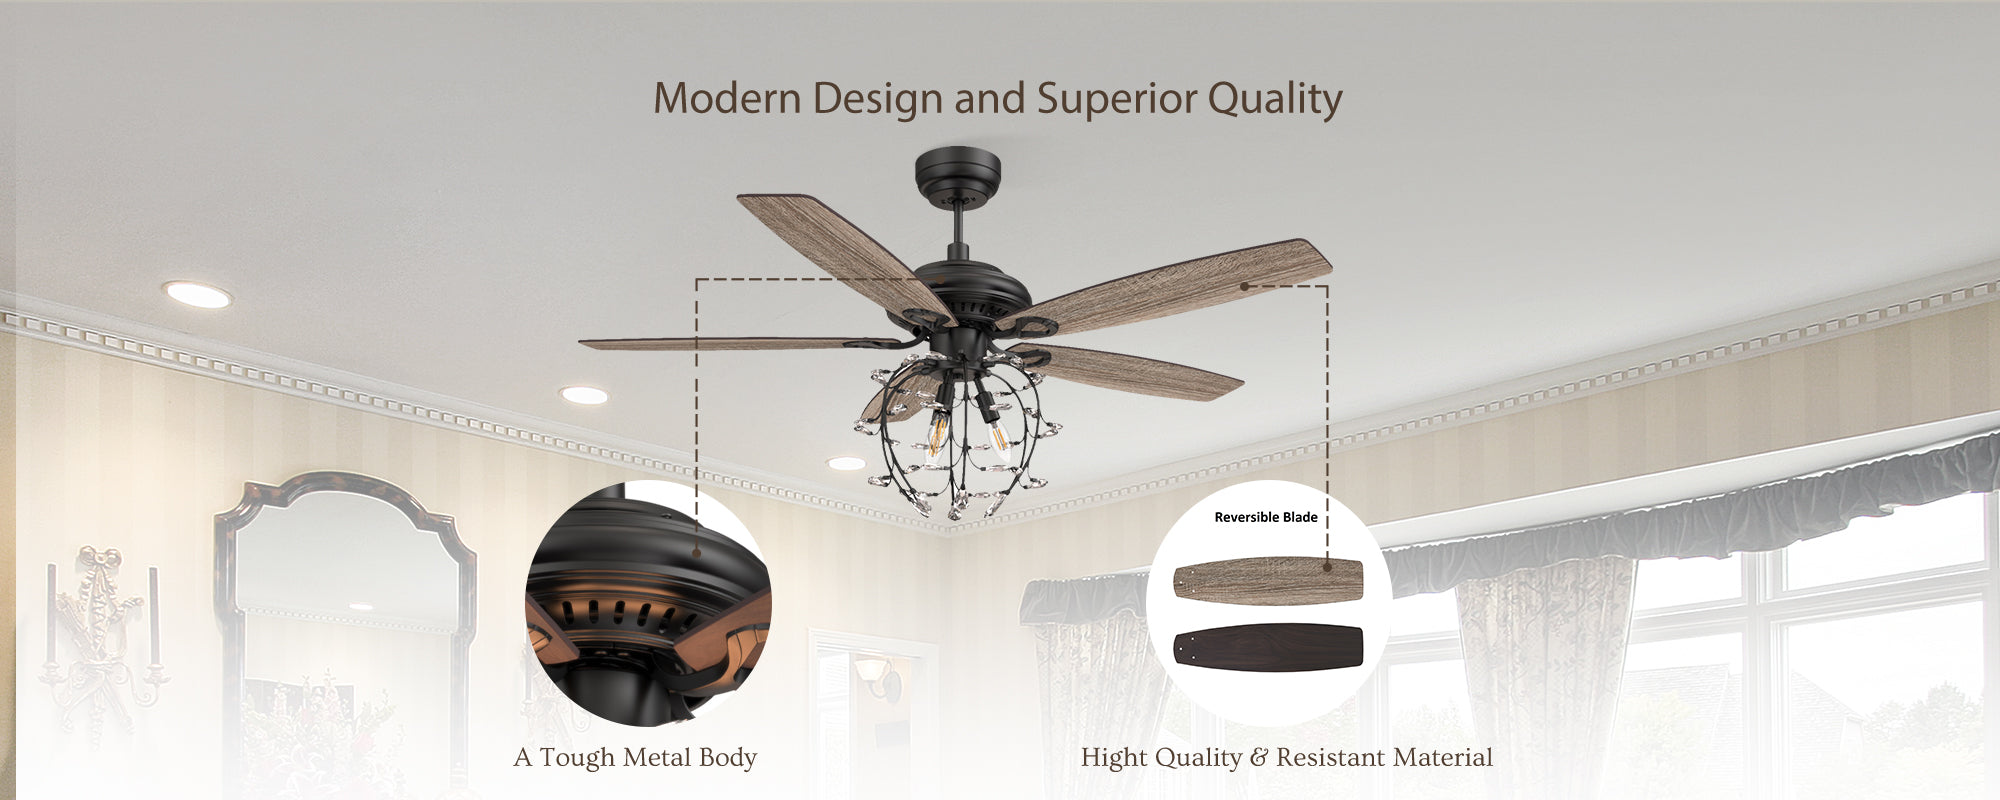 Carro-Smafan-Cedar-52''-10-speed-Crystal-Ceiling-Fan-with-Remote-and-Reversible-Fan-Blades-brilliant-upscale-design-good-Reliable-Finest-Material (2)